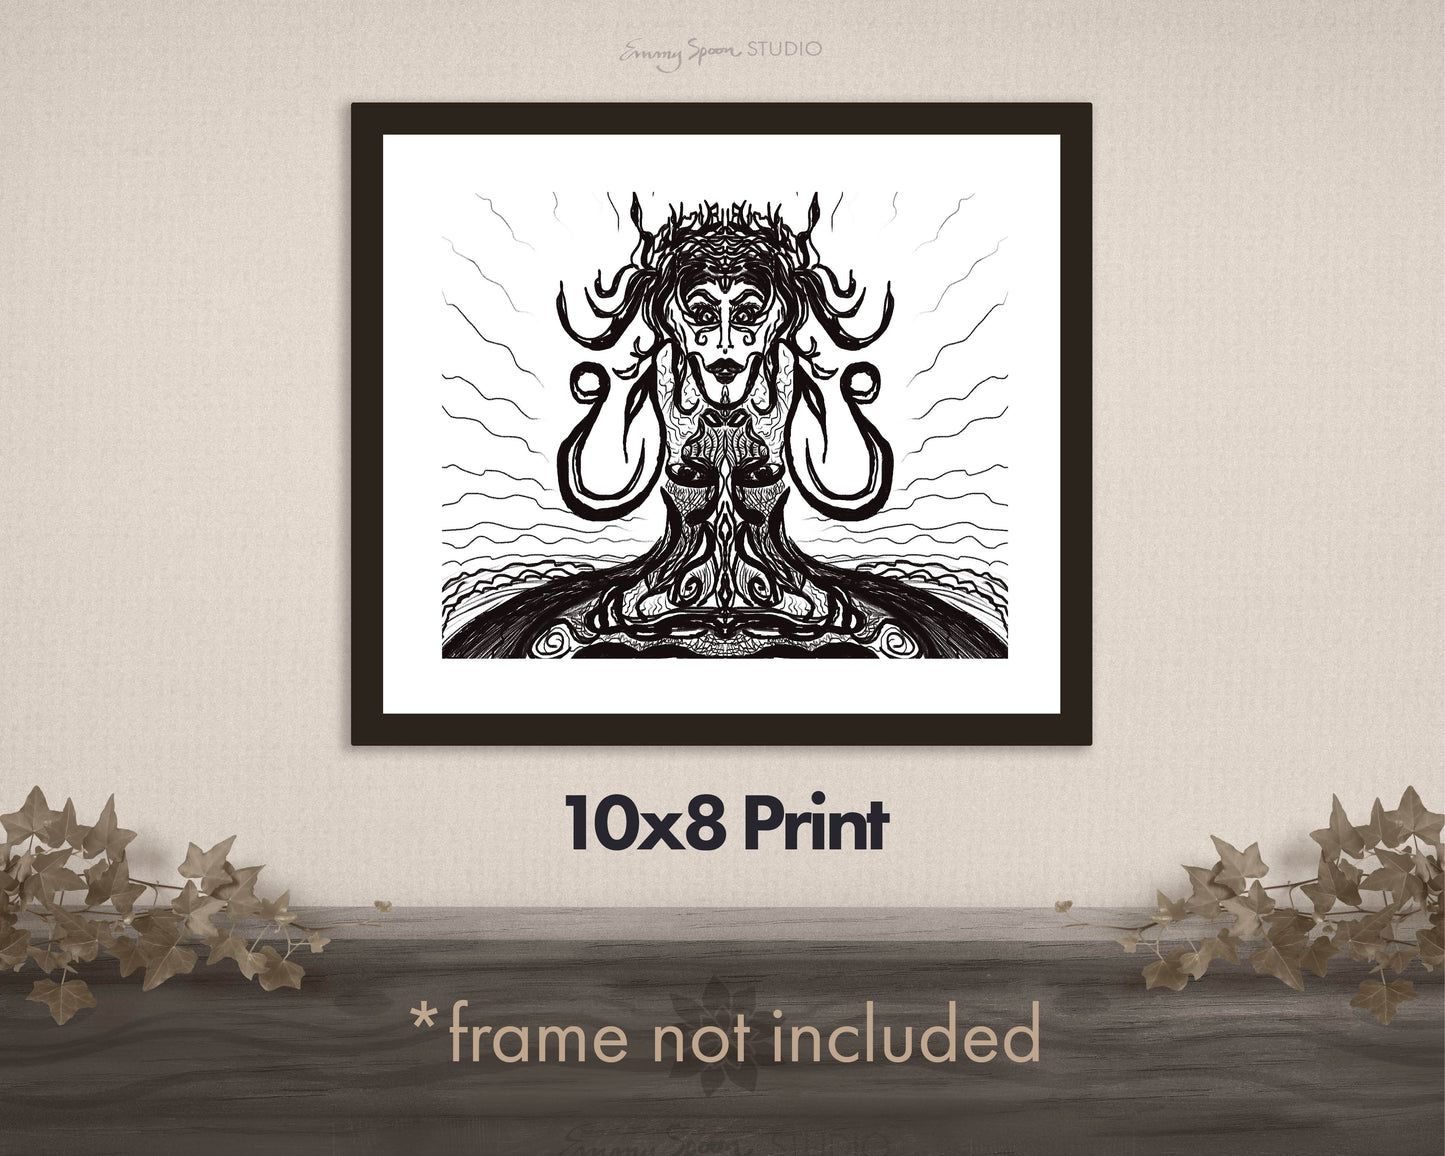 Giclee Print Medusa (2012) by Emmy Spoon Studio 10x8 print, *frame not included